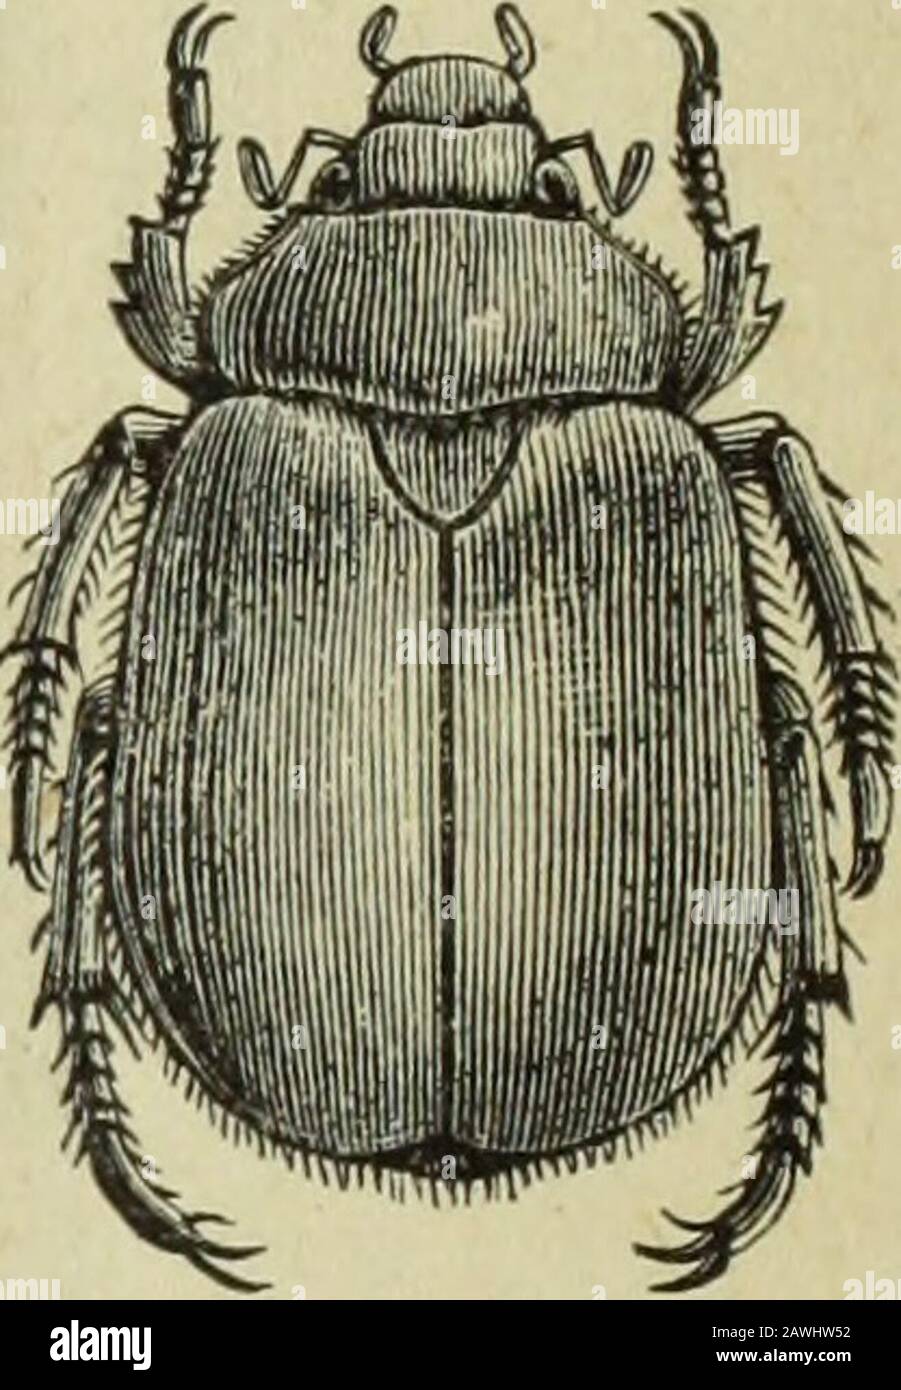 Annual report of the Fruit Growers' Association of Ontario, 1904 . Ficx. 43. Saw-horn beetle (Bup- restis).. Fig. 44. Leaf-horn beetle. flies, Tachina flies, Syrphus flies (Fig. 50) and cheese flies. The Tachina andSyrphus flies are very beneficial. The Hemiptera or Bugs are divided into the True-bugs (Fig. 51), theLeaf-hoppers and Plant, lice (Fig. 52) and Lice. Nearly all are injurious,and frequently do much injury. They suck the juices from plants. Stock Photo